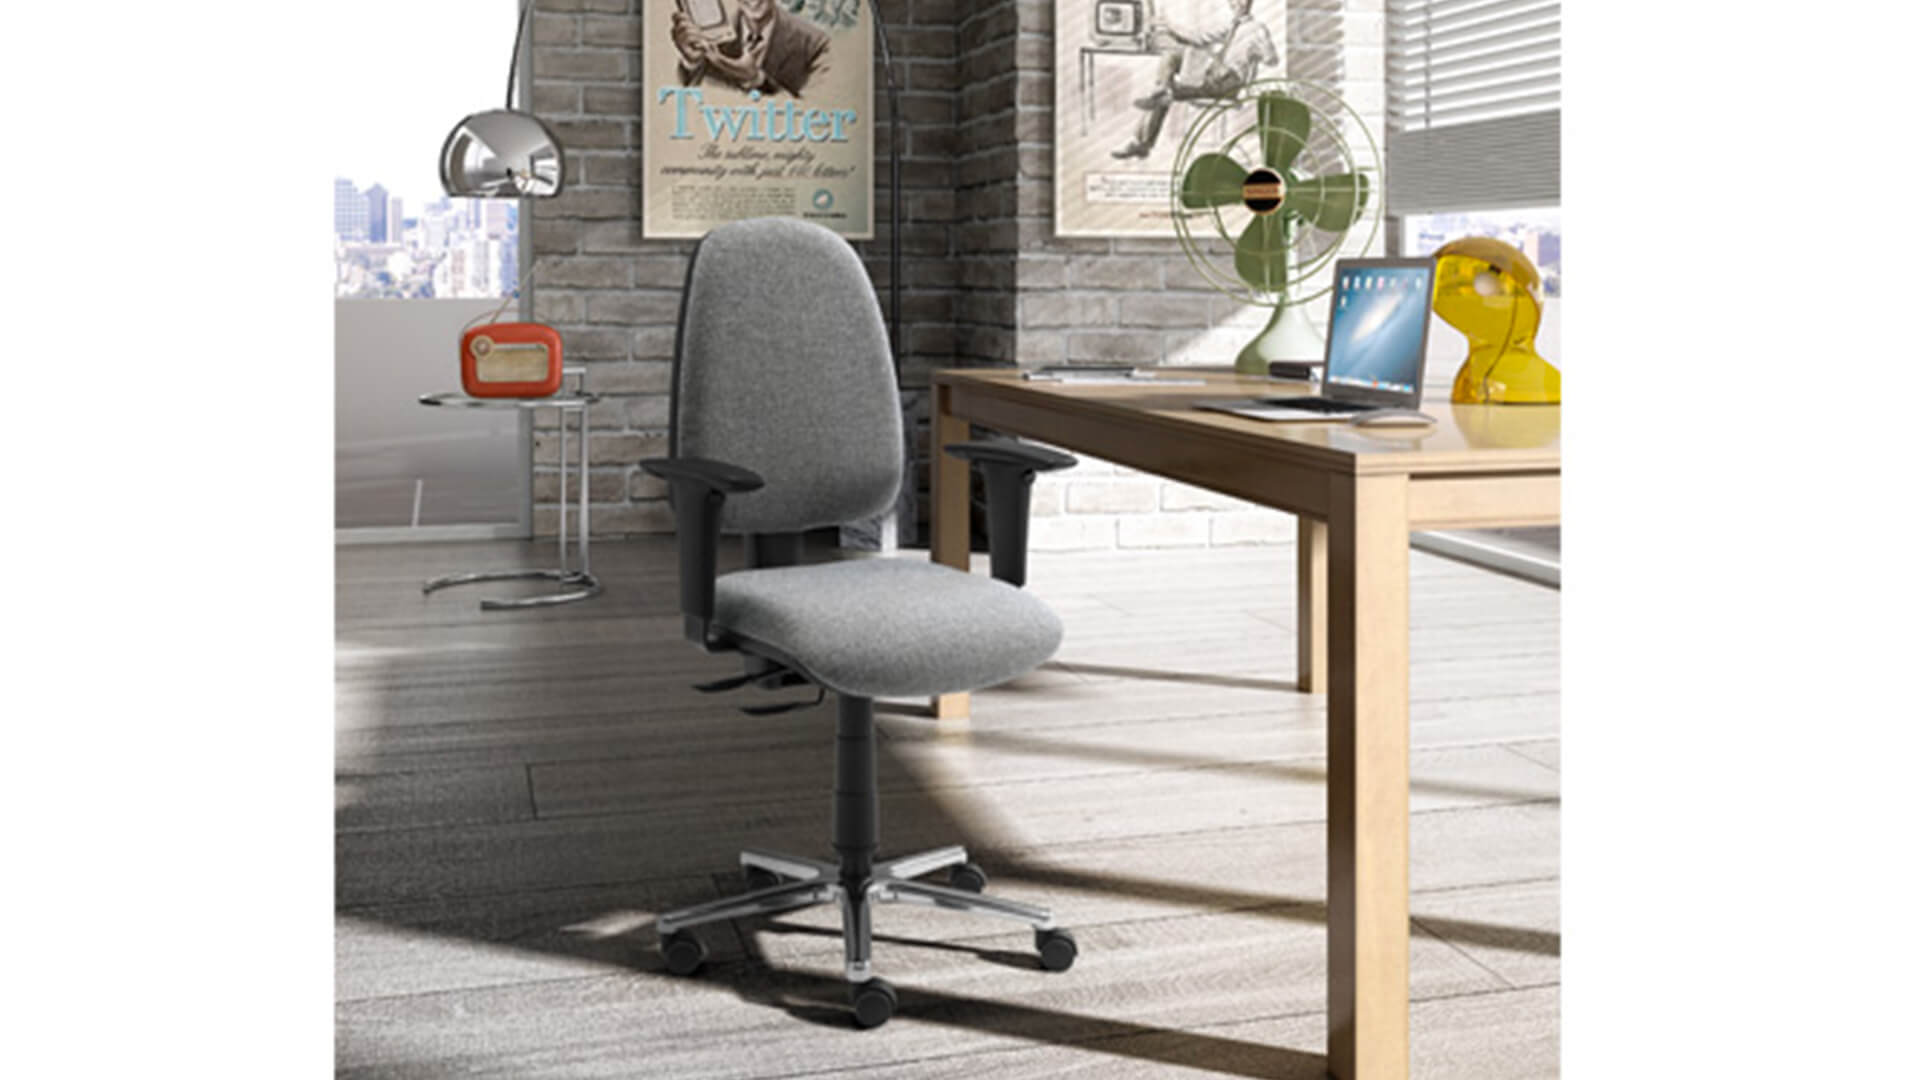 Blog IDW - How to furnish a perfect office area in your home